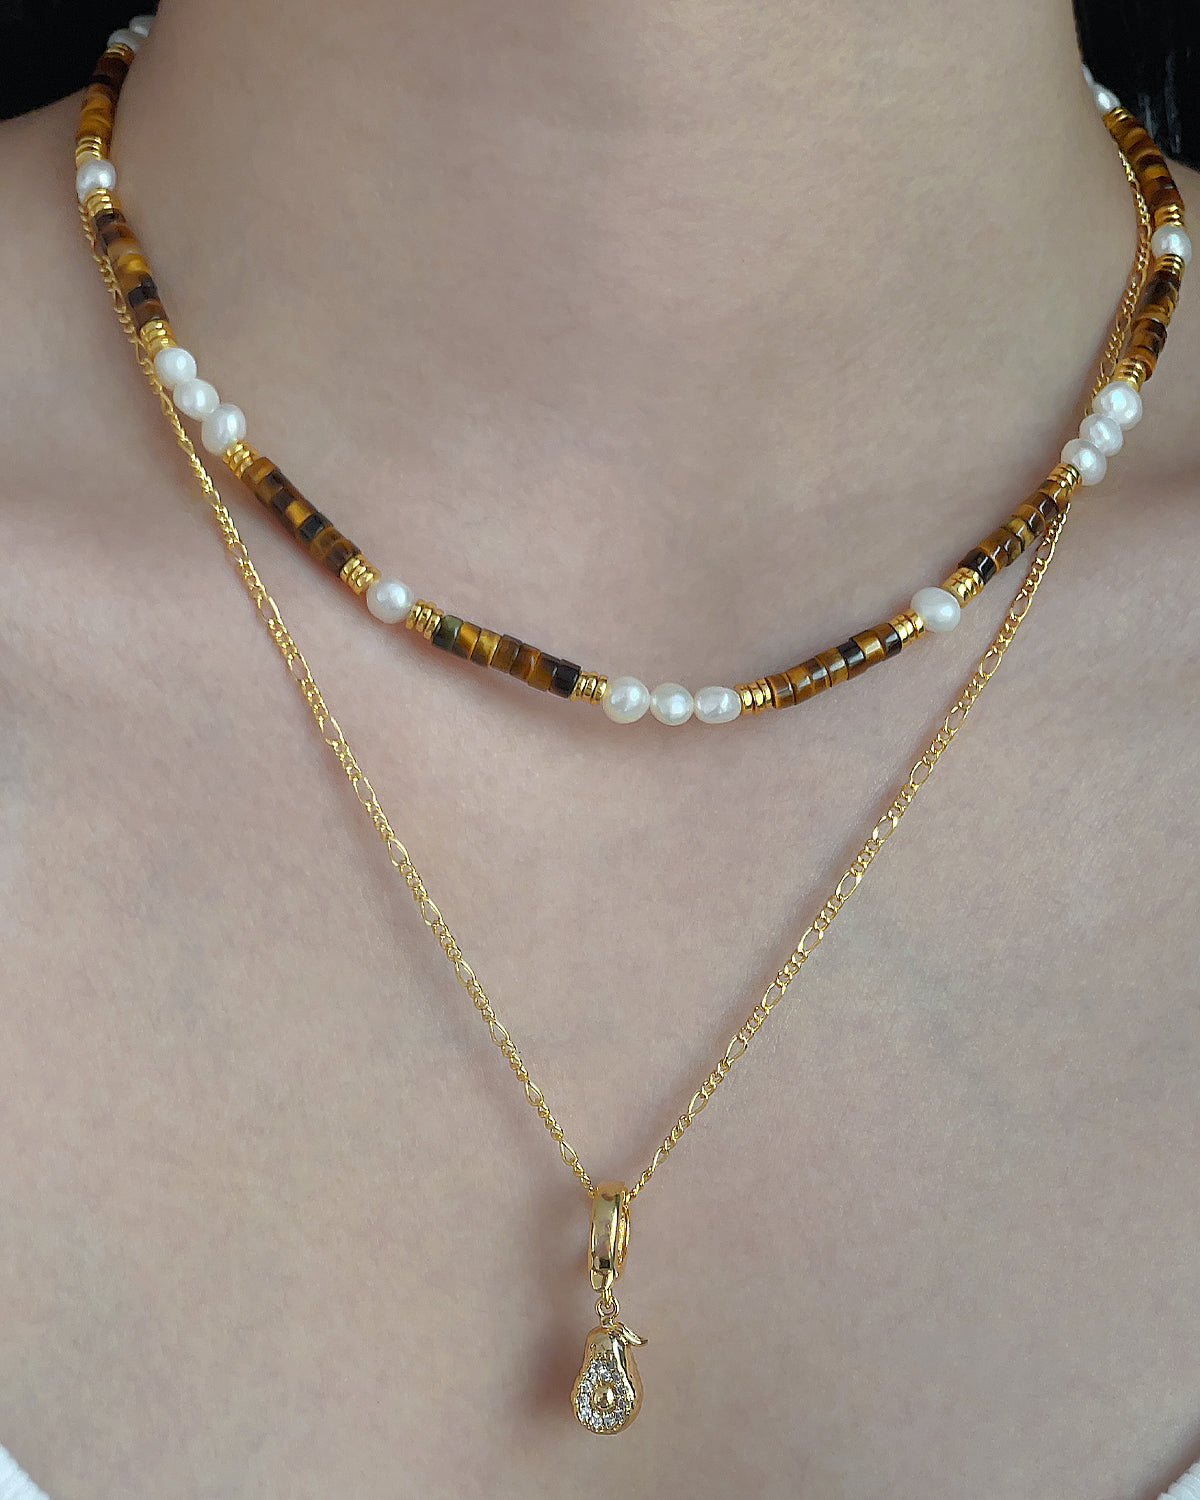 Vitality Tiger's Eye & Baroque Pearl Necklace